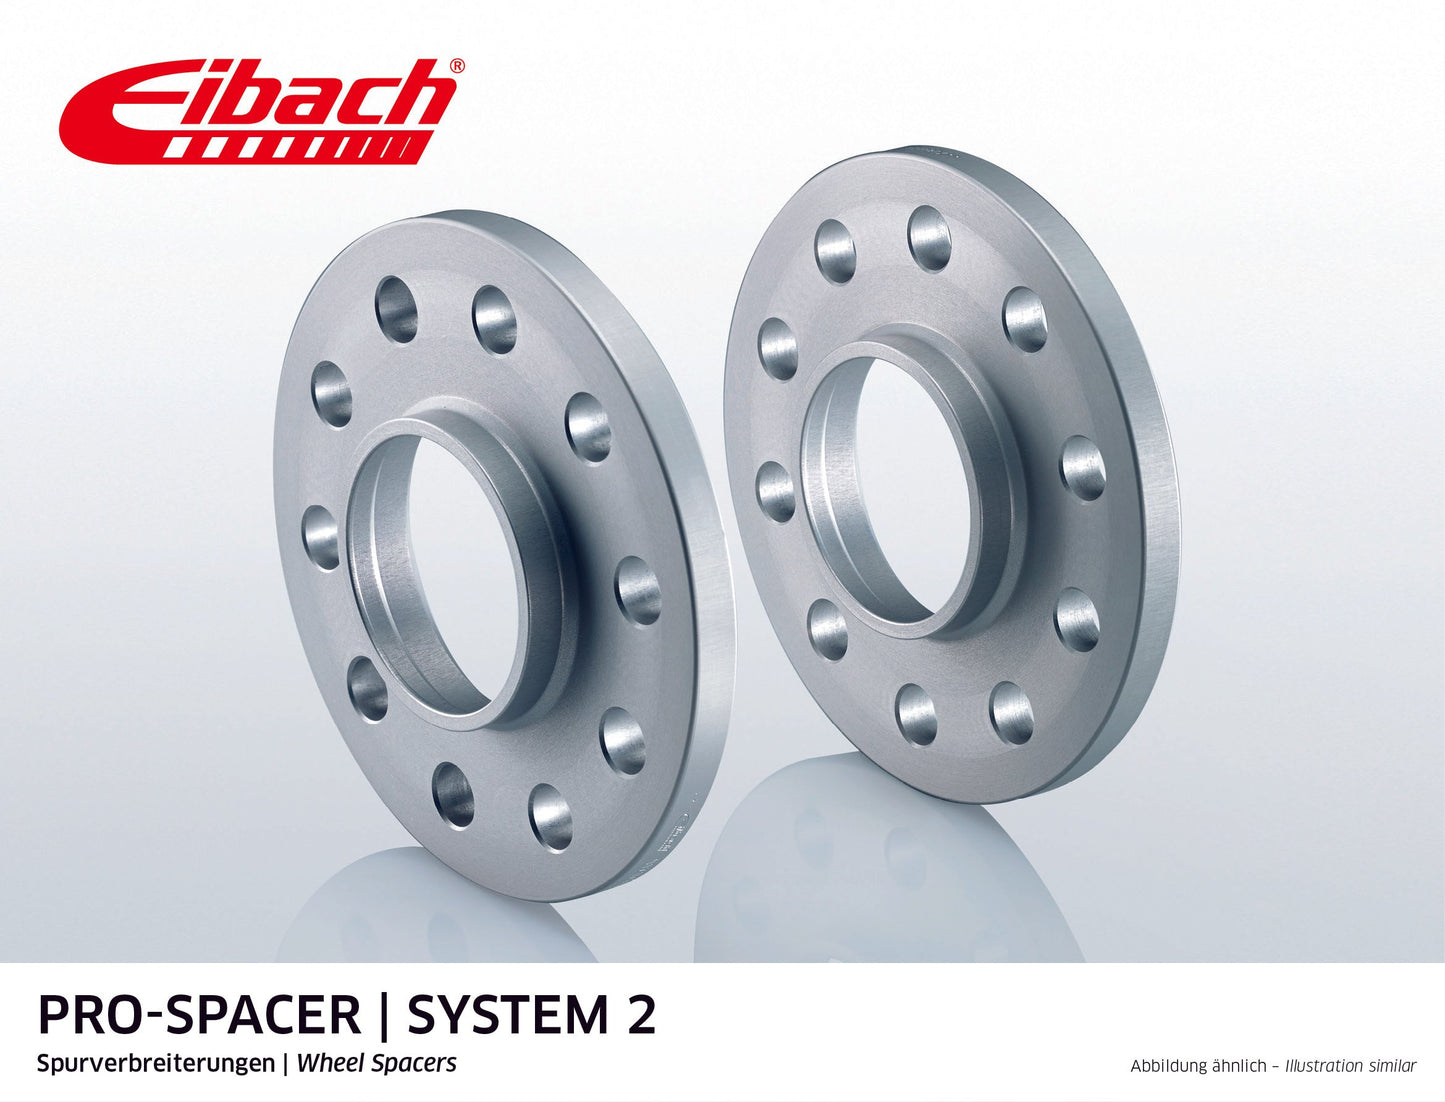 Eibach Pro-Spacer Kit (Pair Of Spacers) 18mm Per Spacer (System 2) S90-2-18-004 (Silver) at £124.46